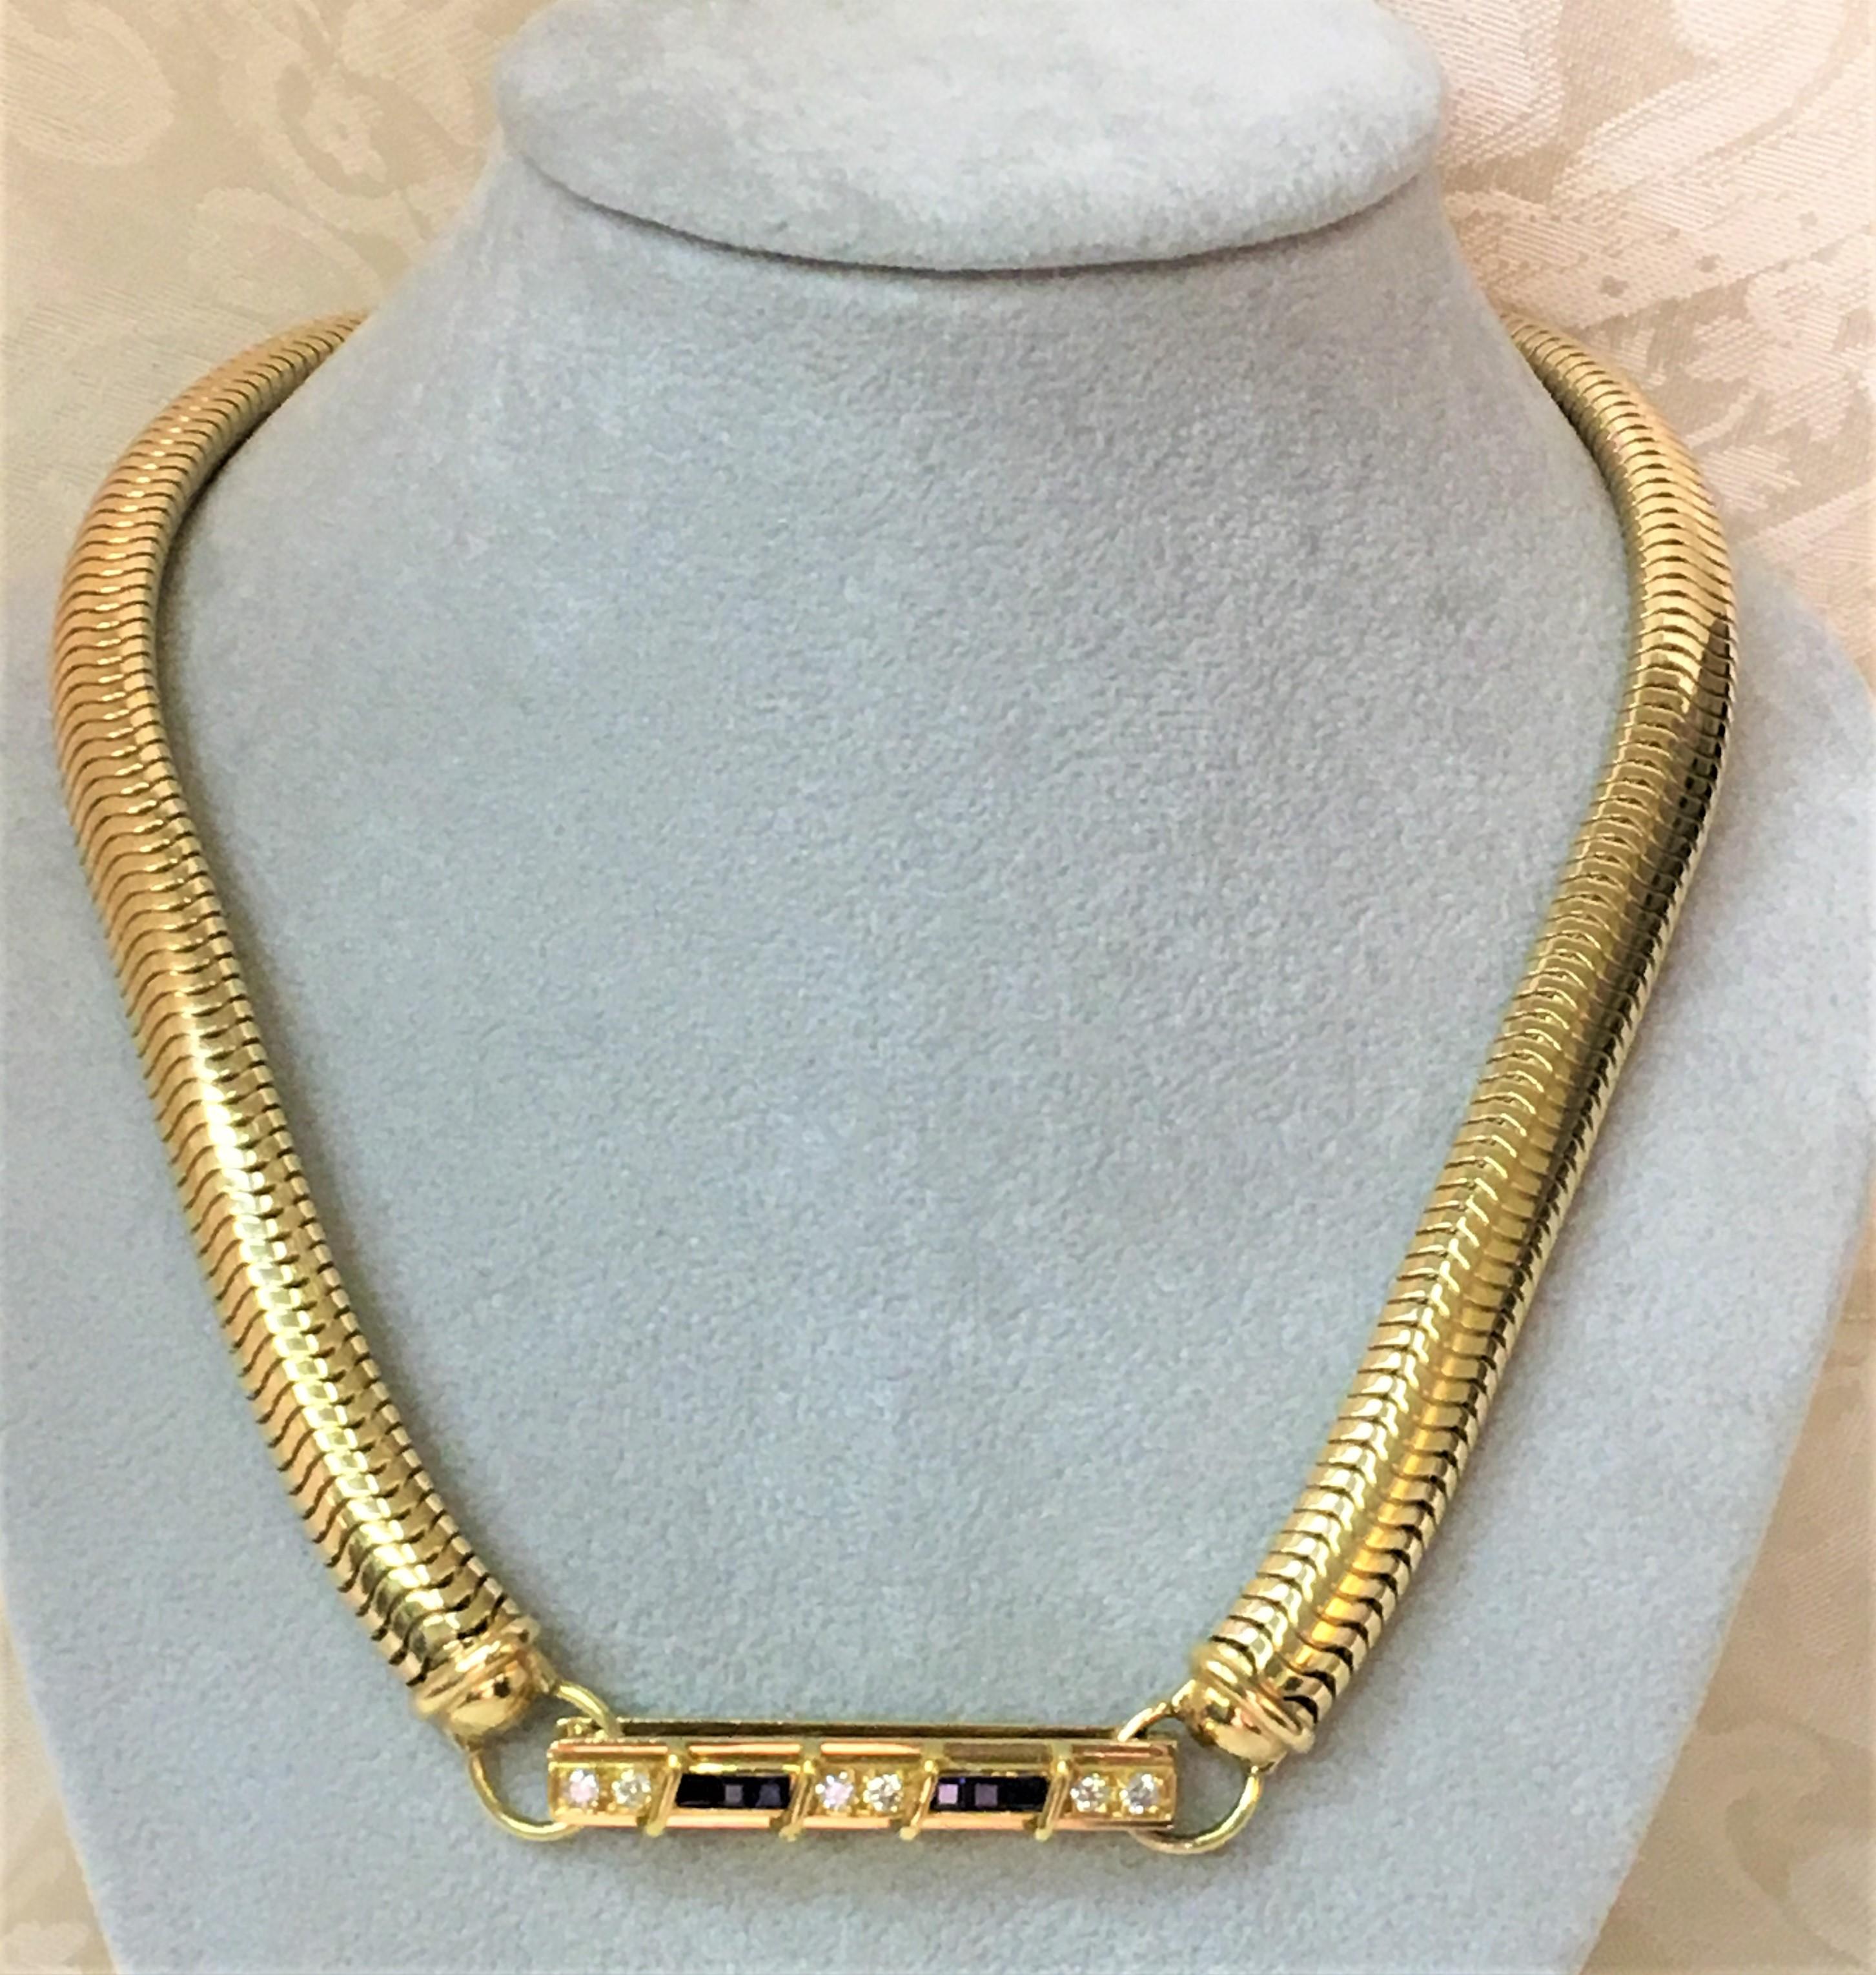 This is truly a one-of-a-kind piece with a beautiful clasp!   
Necklace can be worn with the clasp in front, back or side, giving you several looks with one piece!
14 karat yellow gold snake necklace,  approximately 9mm wide
Gold clasp has 6